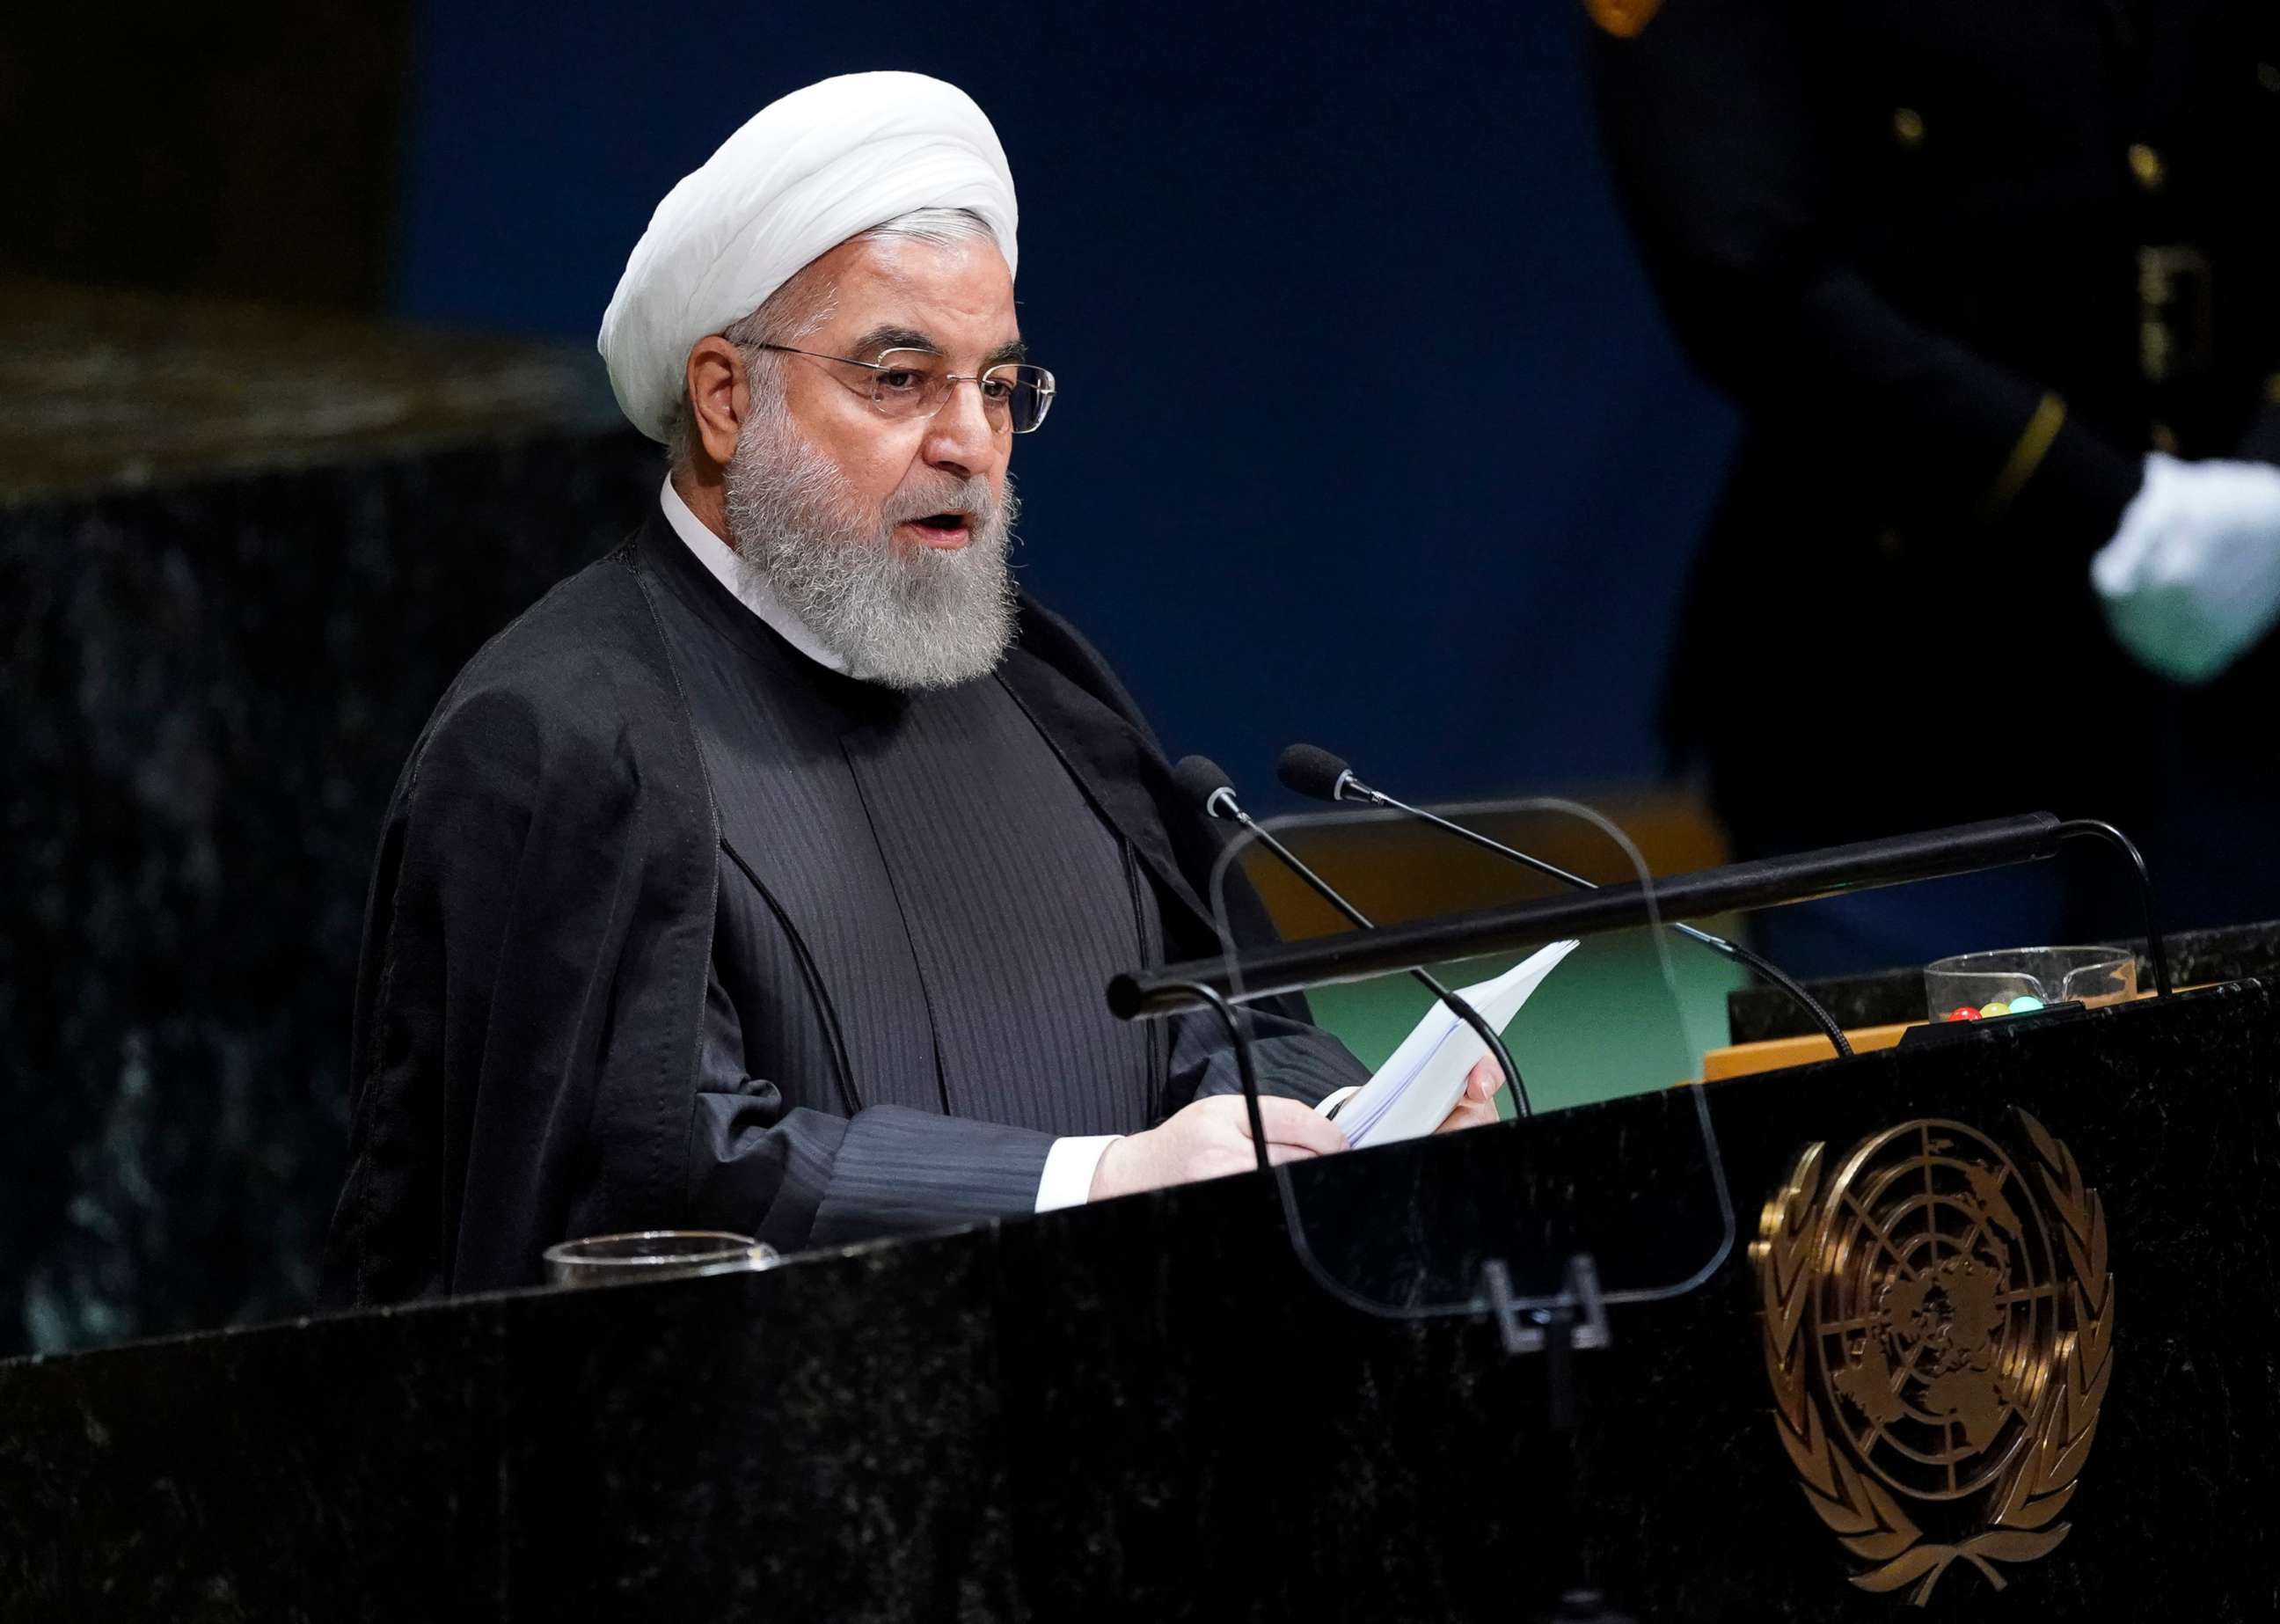 PHOTO: Iran's President Hassan Rouhani addresses the 74th session of the United Nations General Assembly at U.N. headquarters in New York, Sept. 25, 2019.